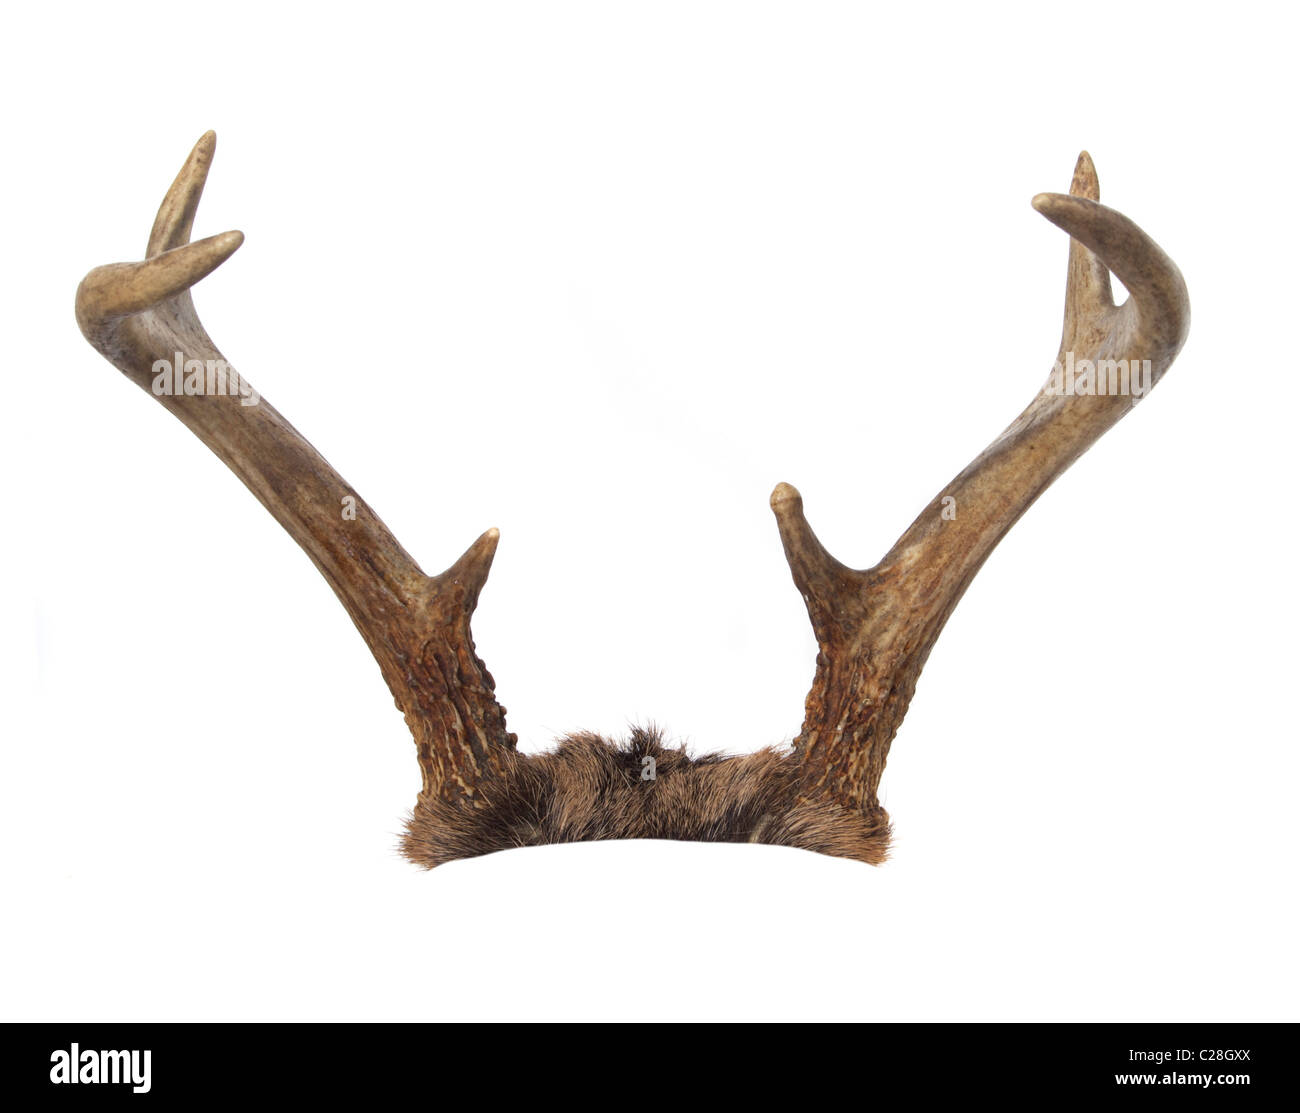 Deer antlers isolated on white Stock Photo